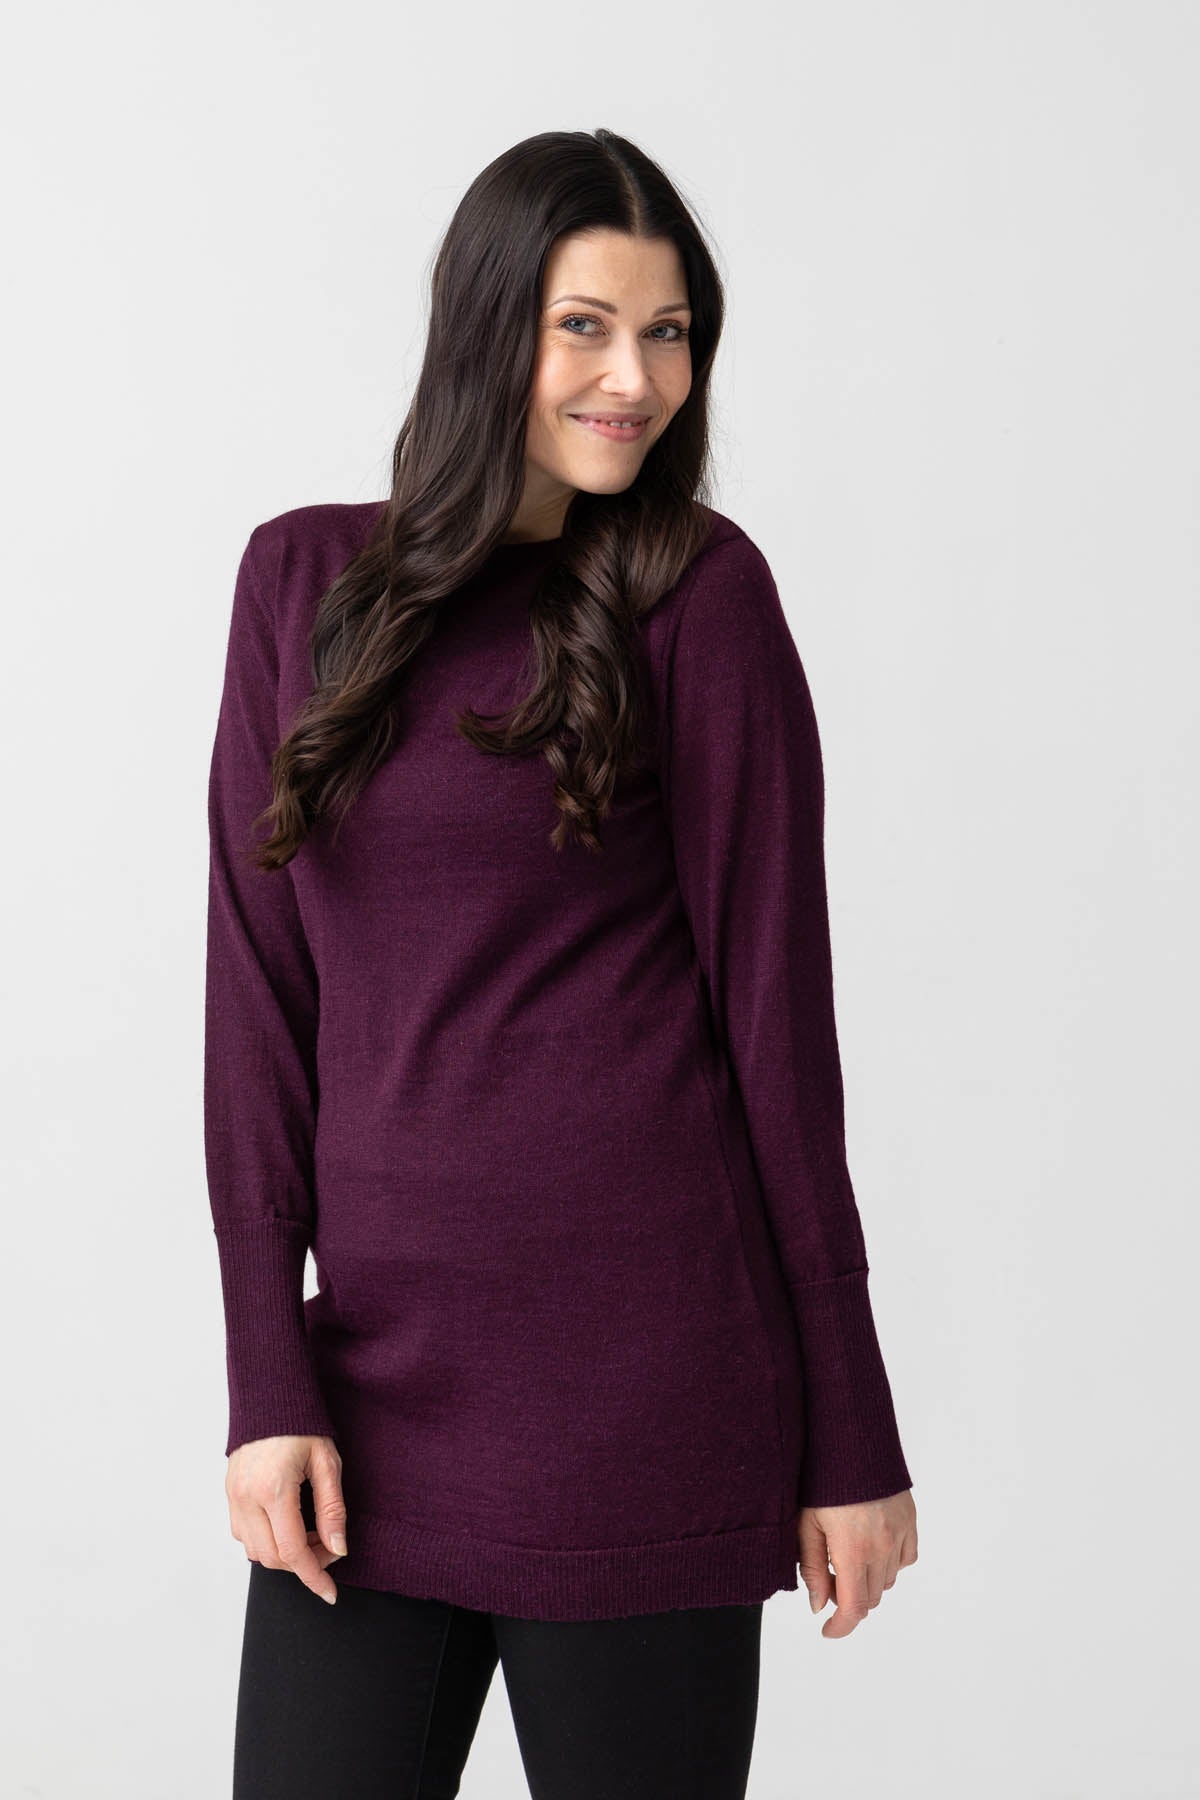 Sipán knitted tunic - plum 